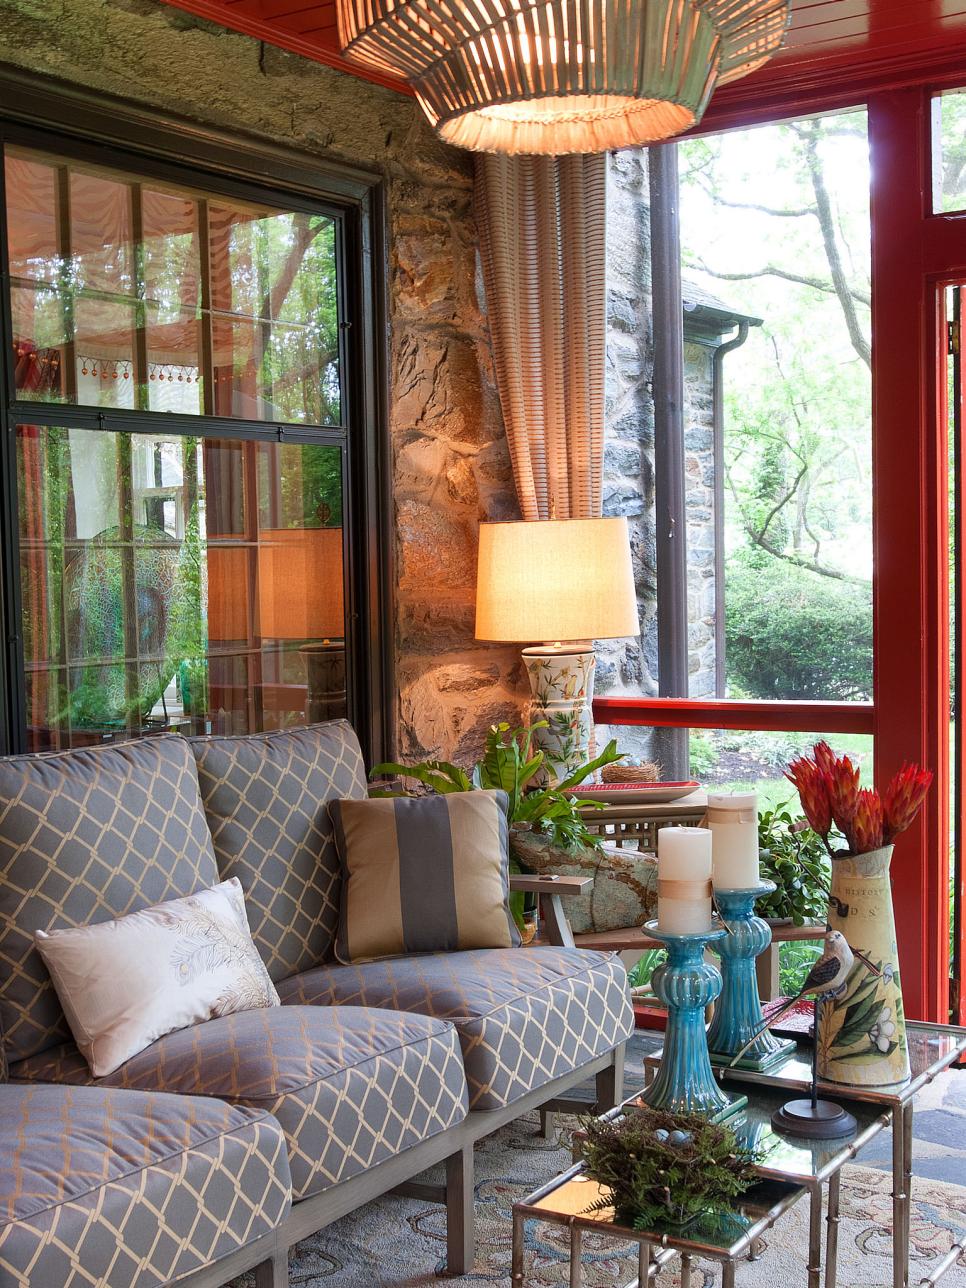 Eclectic, Red Sun Room With Outdoor Sofa and Nesting Tables